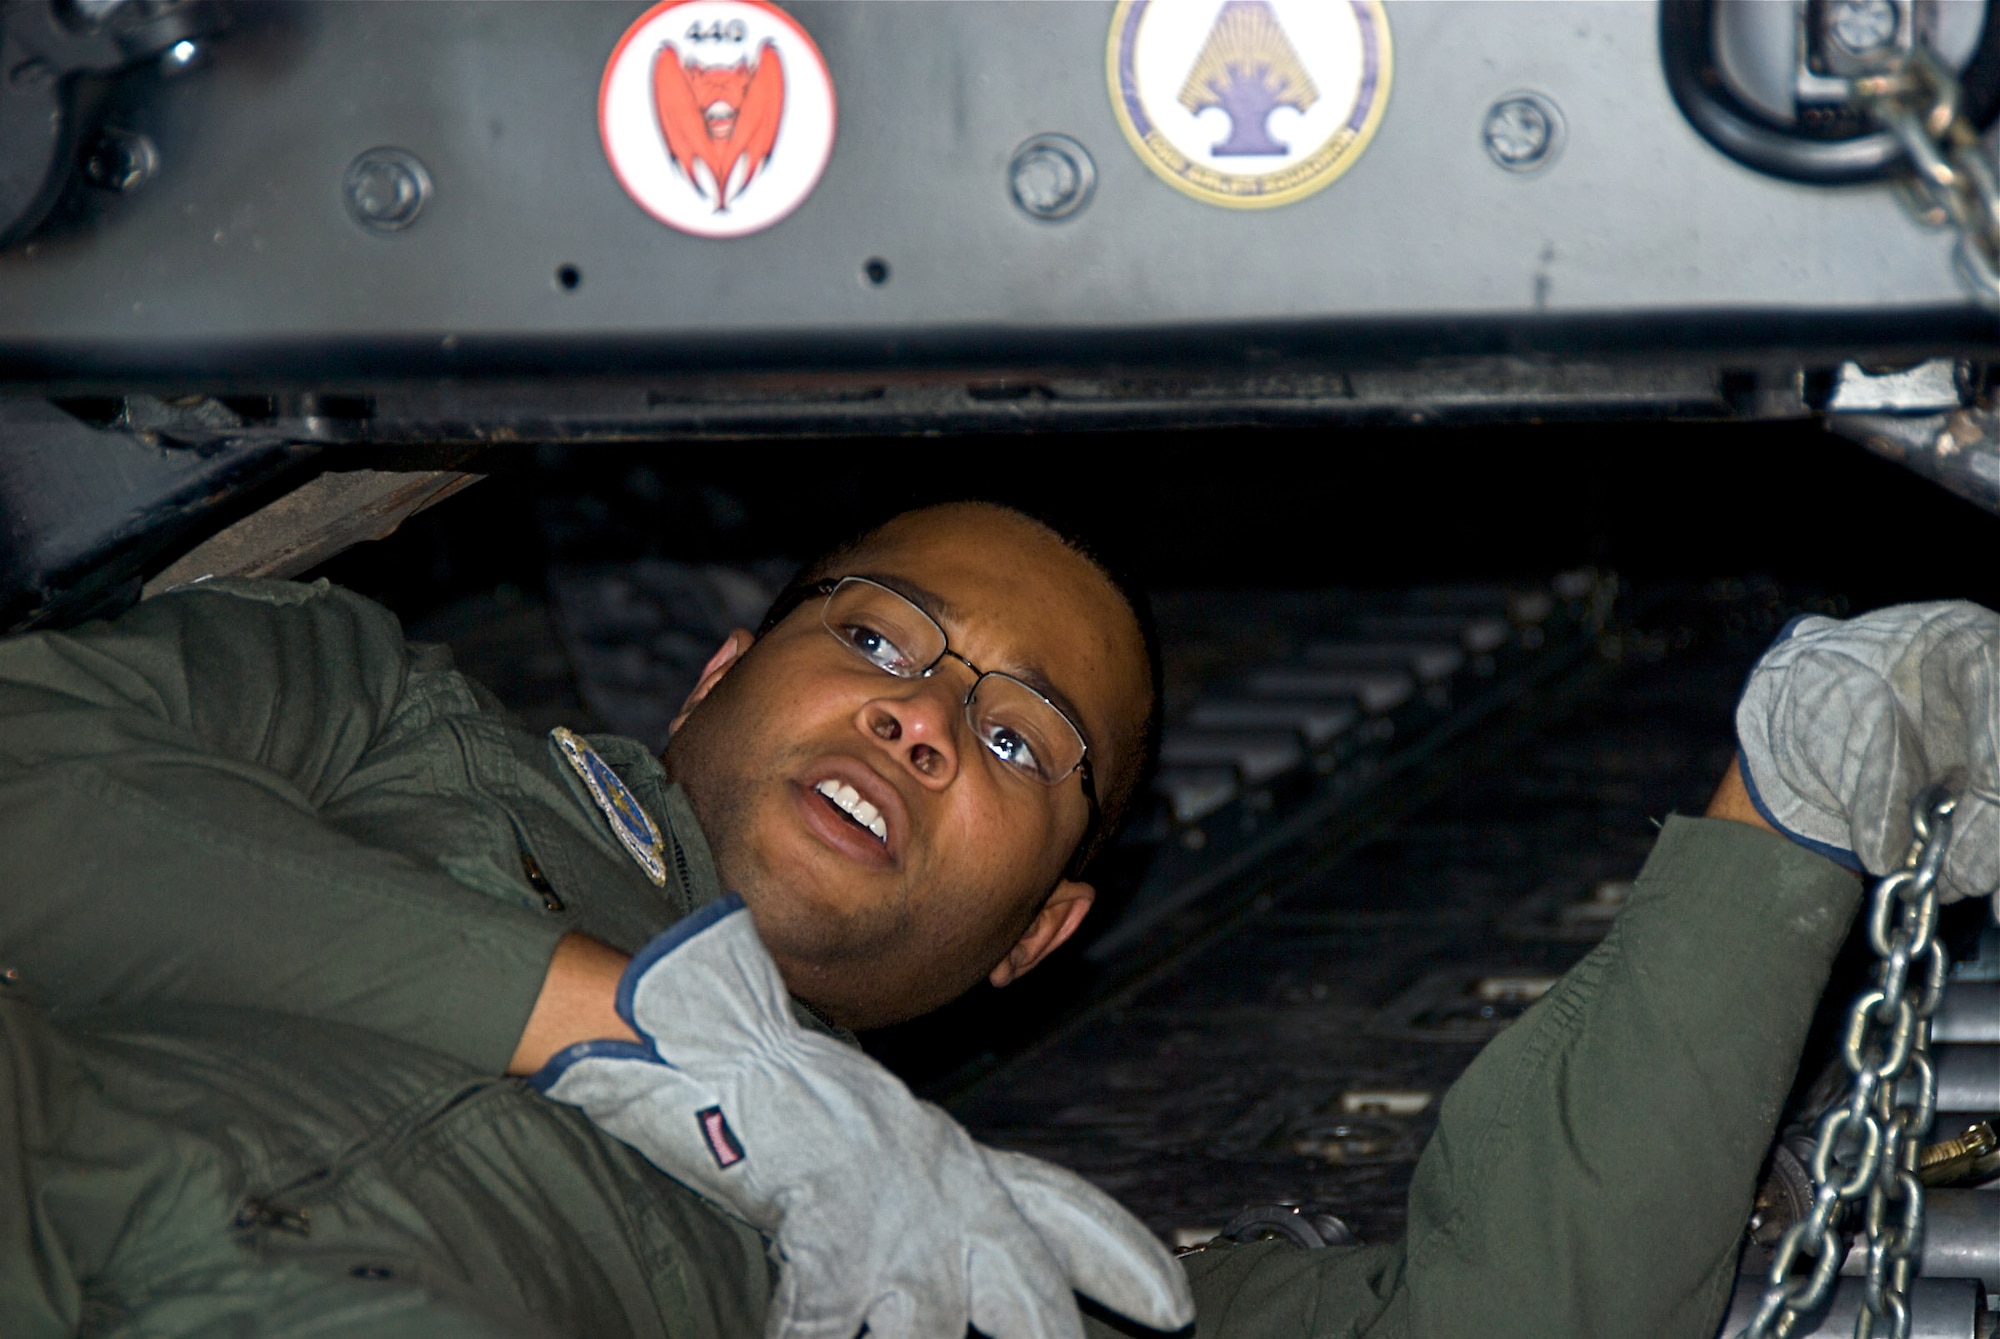 Staff Sgt Marcus Allen a 109th Airlift Squadron Loadmaster secures Moon-1 Humvee Rover aboard a 133rd Airlift Wing, Minnesota Air National Guard C-130 Hercules cargo aircraft in Cambridge Bay, Canada 28 May 2009. The C-130 is delivering much needed supplies and providing transportation of vital equipment to support the Haughton-Mars Project in Resolute, Canada. HMP supports an exploration program aimed at developing new technologies, strategies, human's factors experience, and field-based operational know-how key to planning the future exploration of the Moon and Mars.
U.S. Air Force Photo by Tech Sgt Erik Gudmundson (Released)